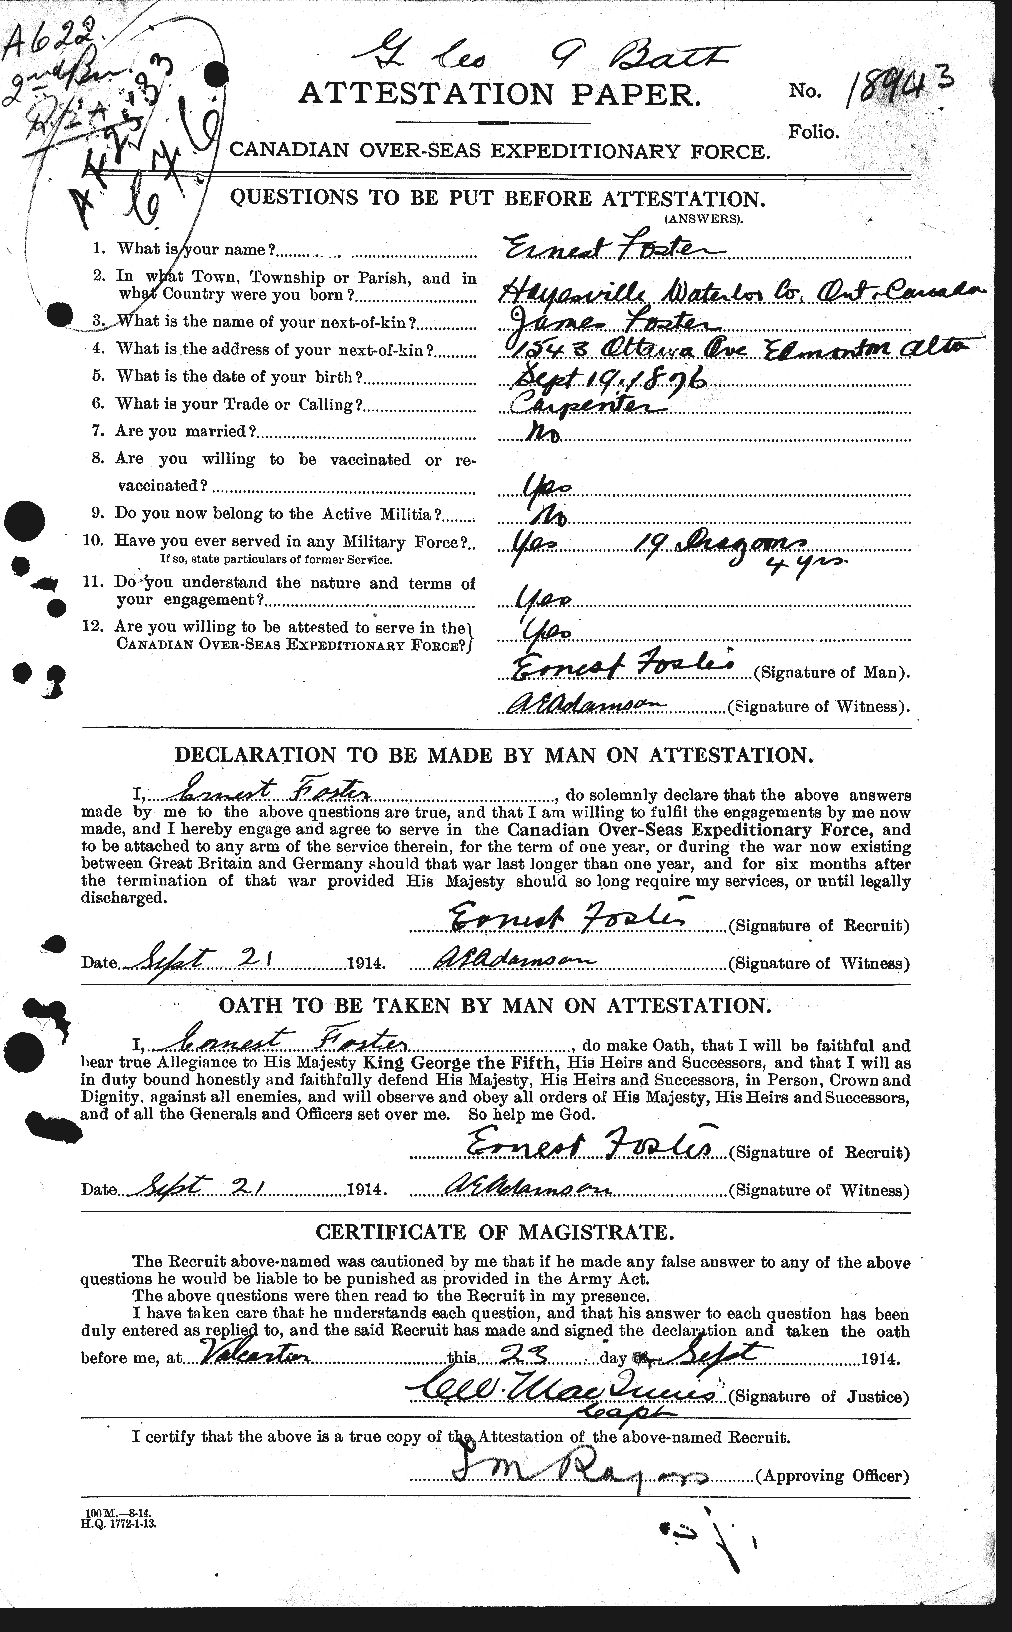 Personnel Records of the First World War - CEF 330600a